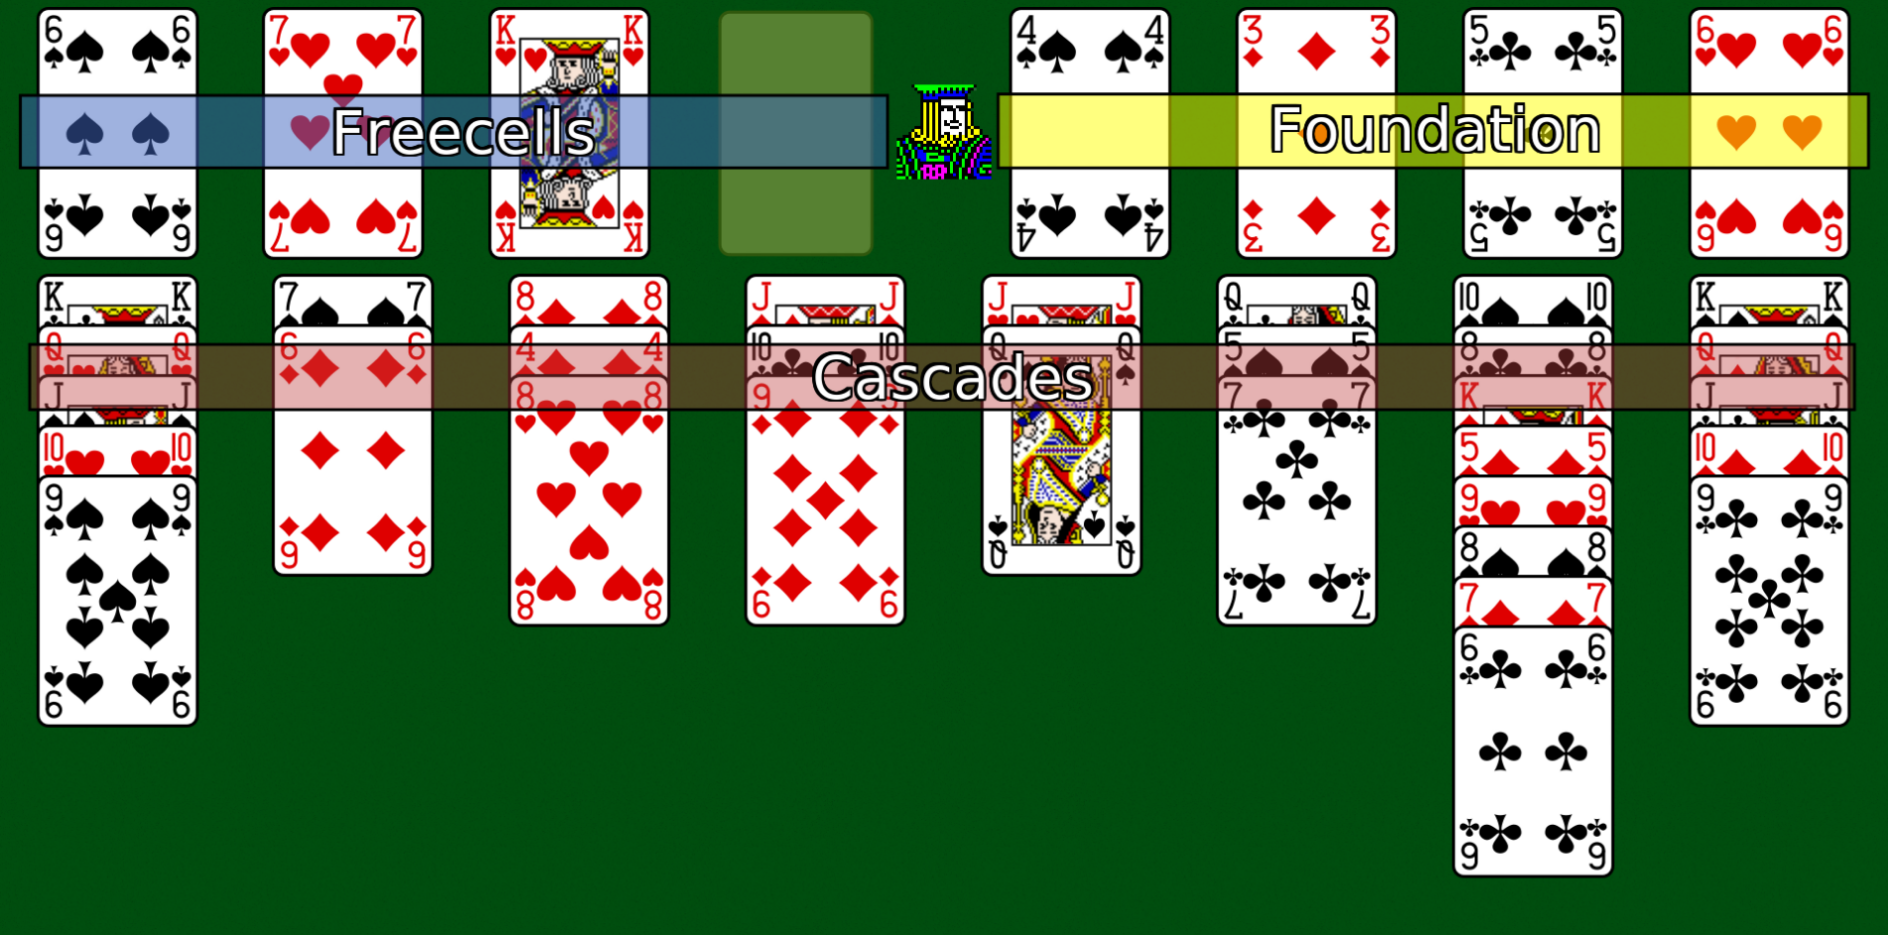 A game of freecell after a few moves